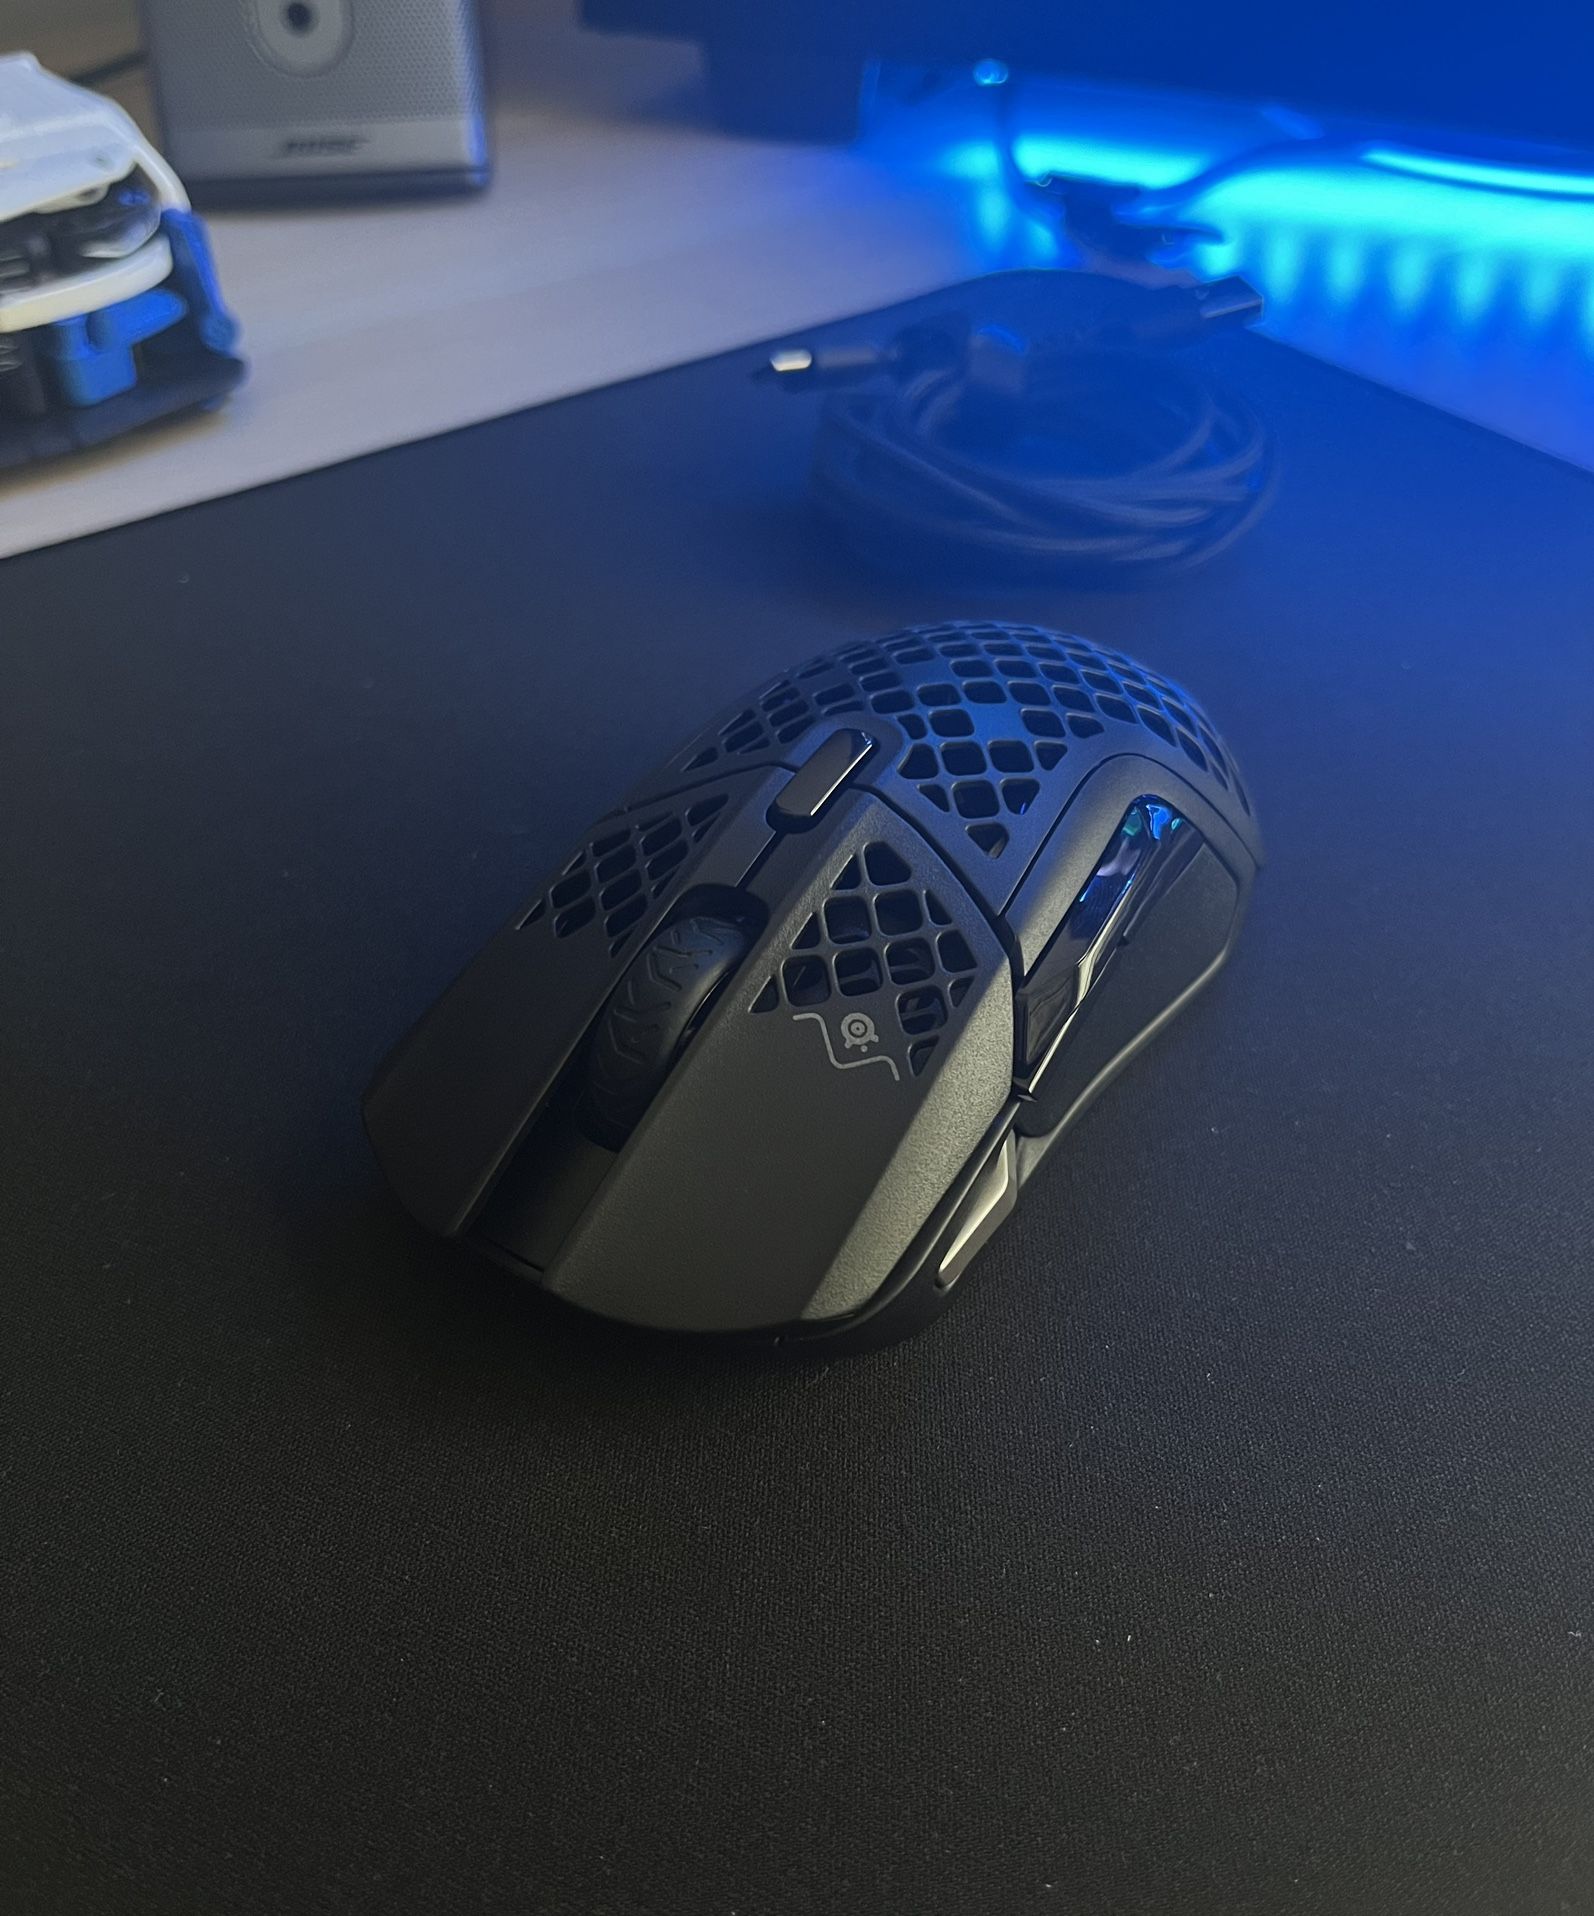 SteelSeries Aerox 5 Wireless Gaming Mouse 